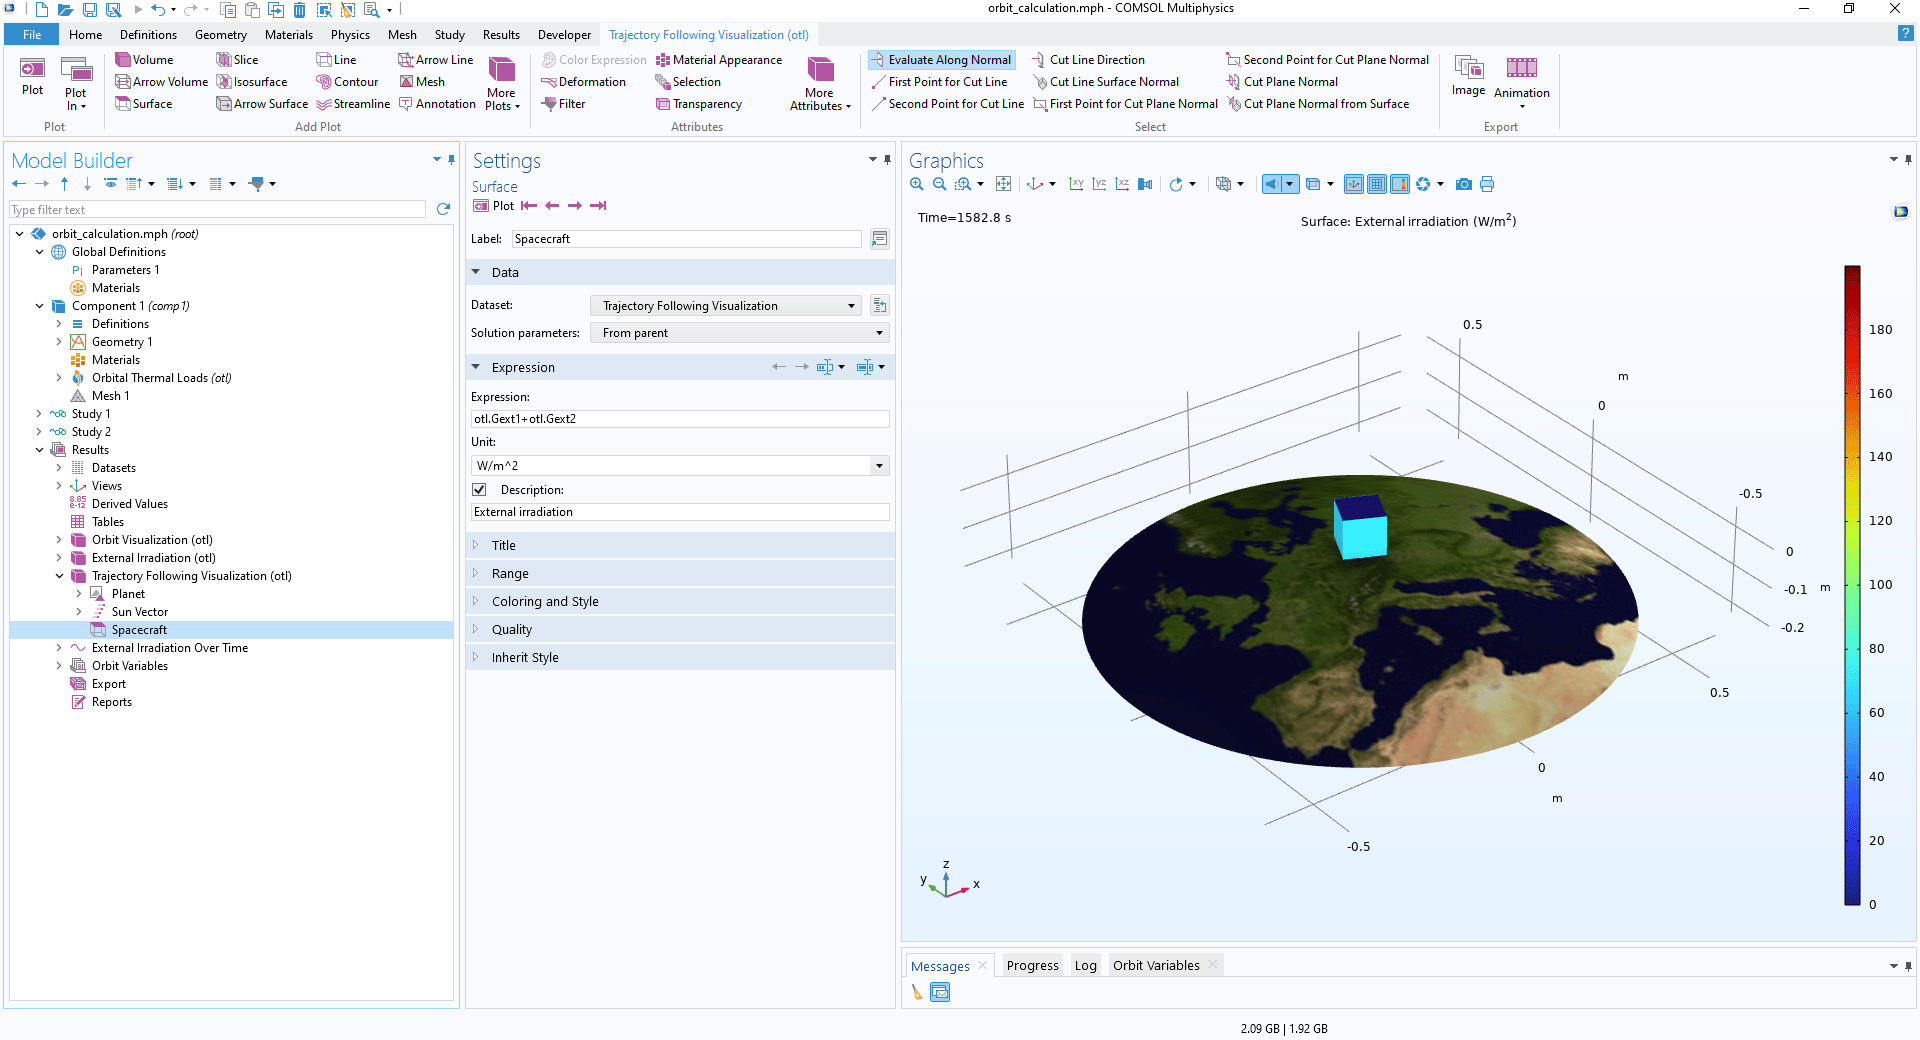 The COMSOL Multiphysics UI showing the Model Builder with a Surface plot highlighted, the corresponding Settings window, and an orbit calculation model in the Graphics window.